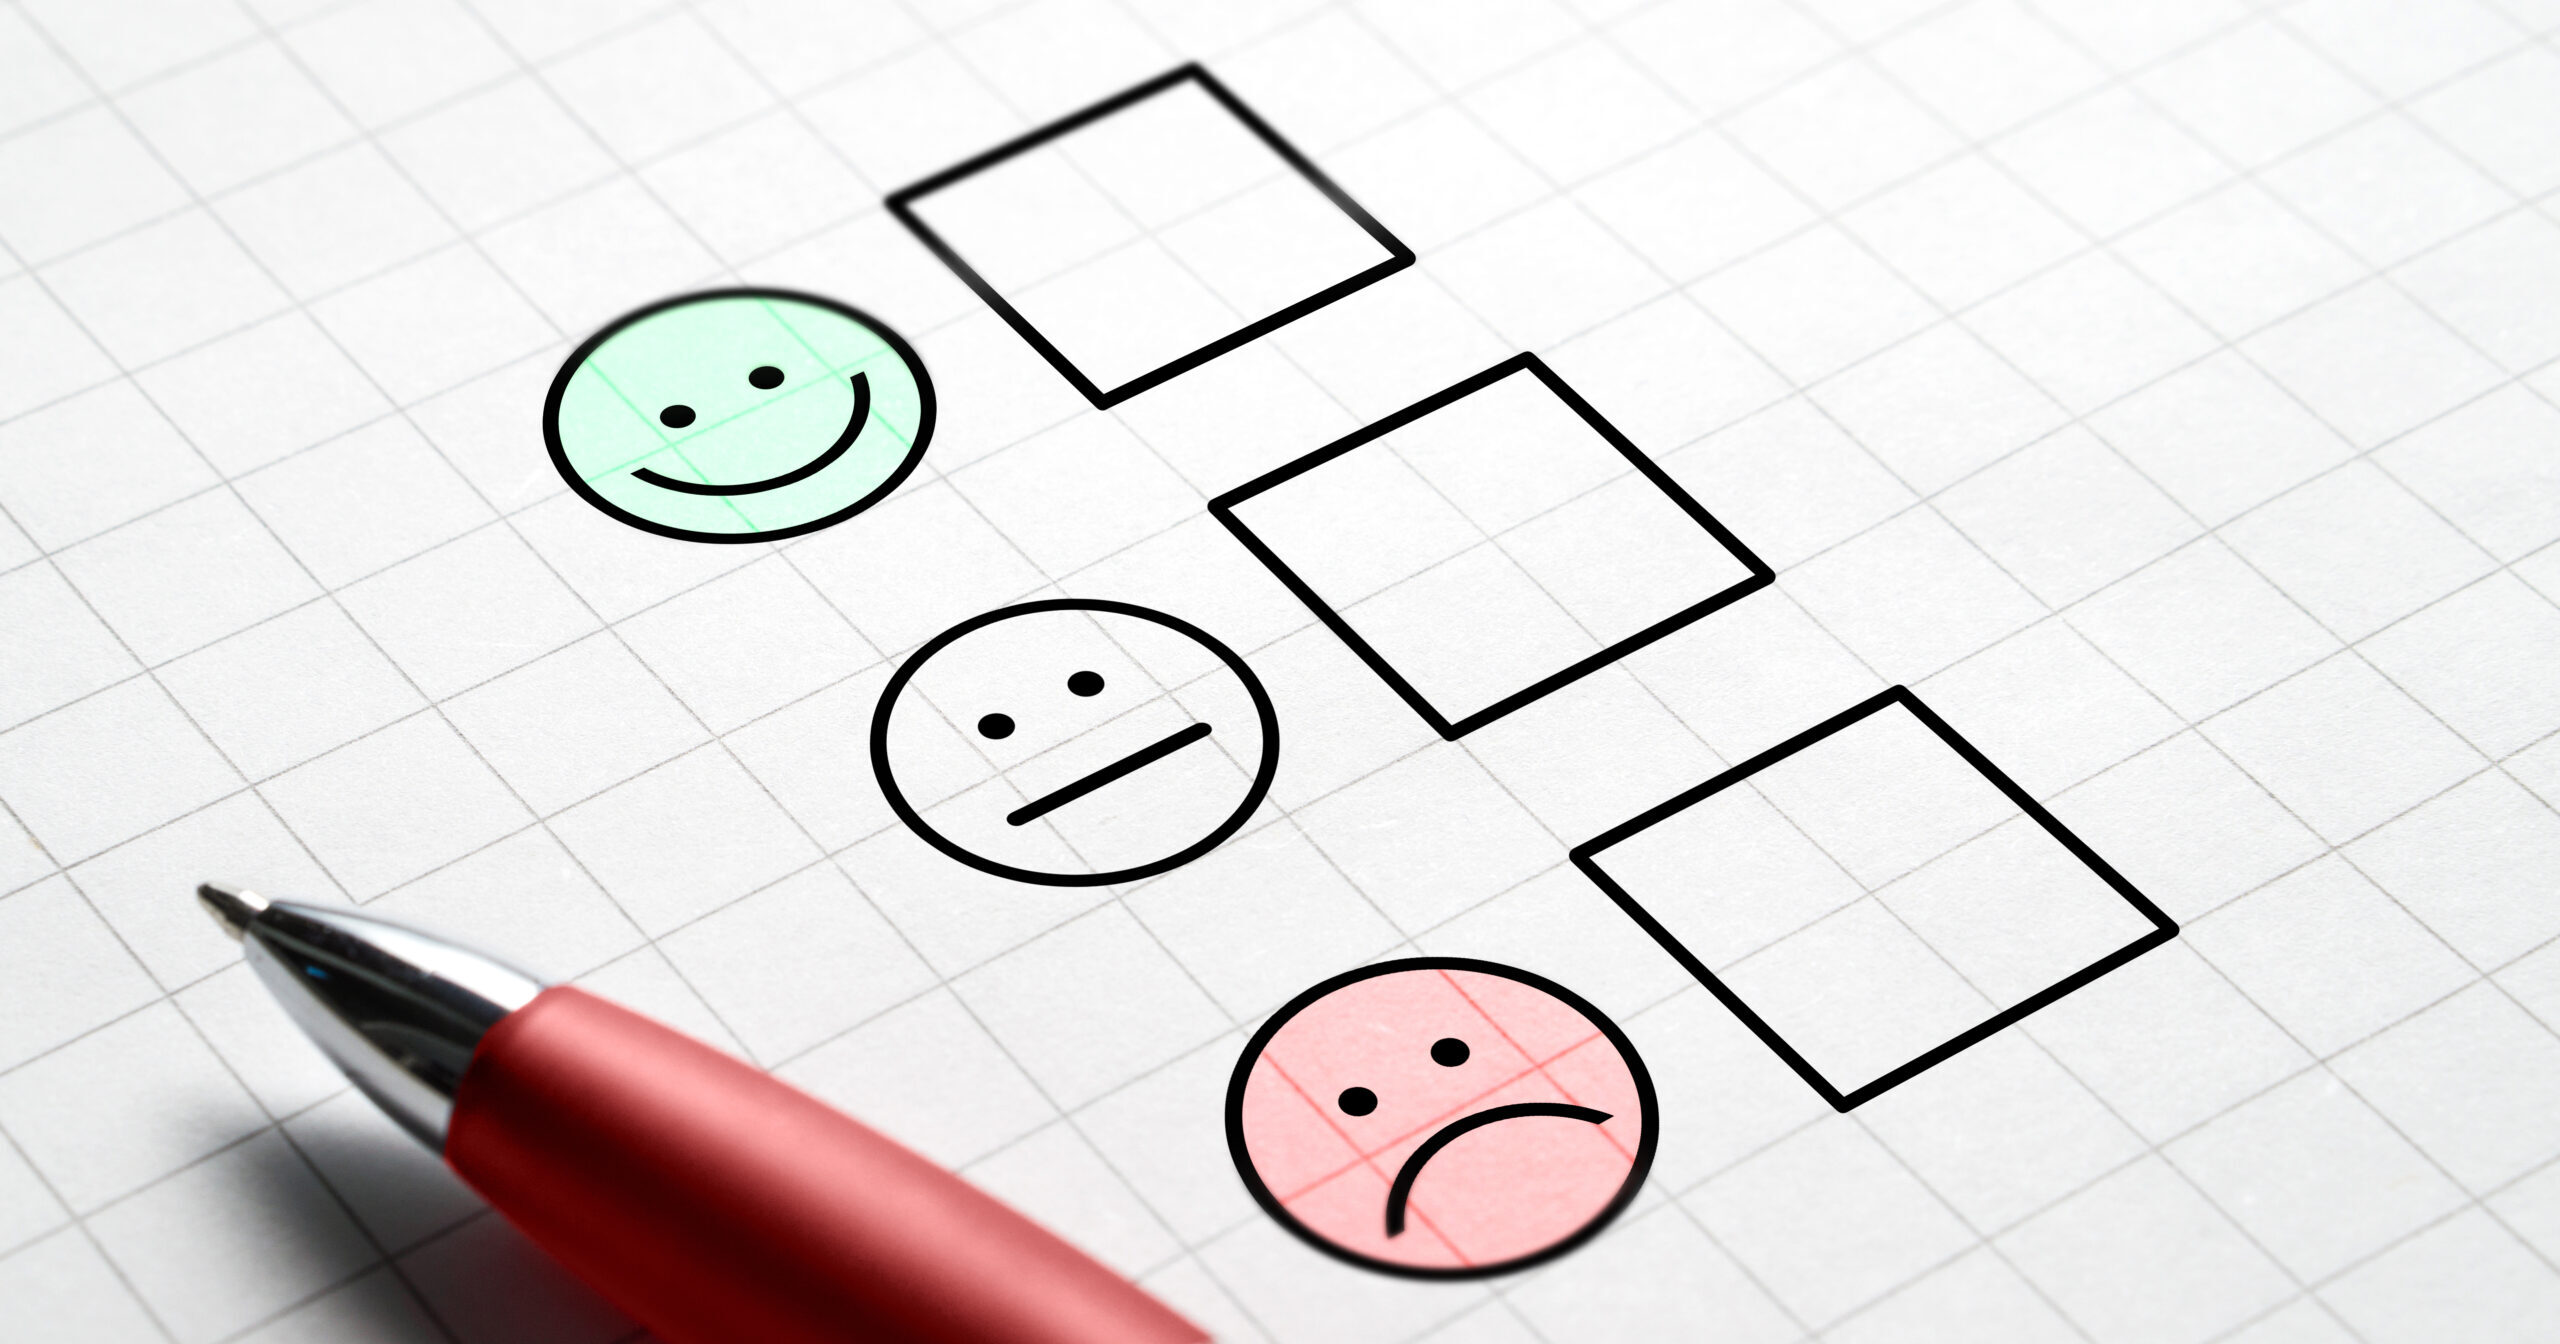 5 Reasons Why People Answer a Survey